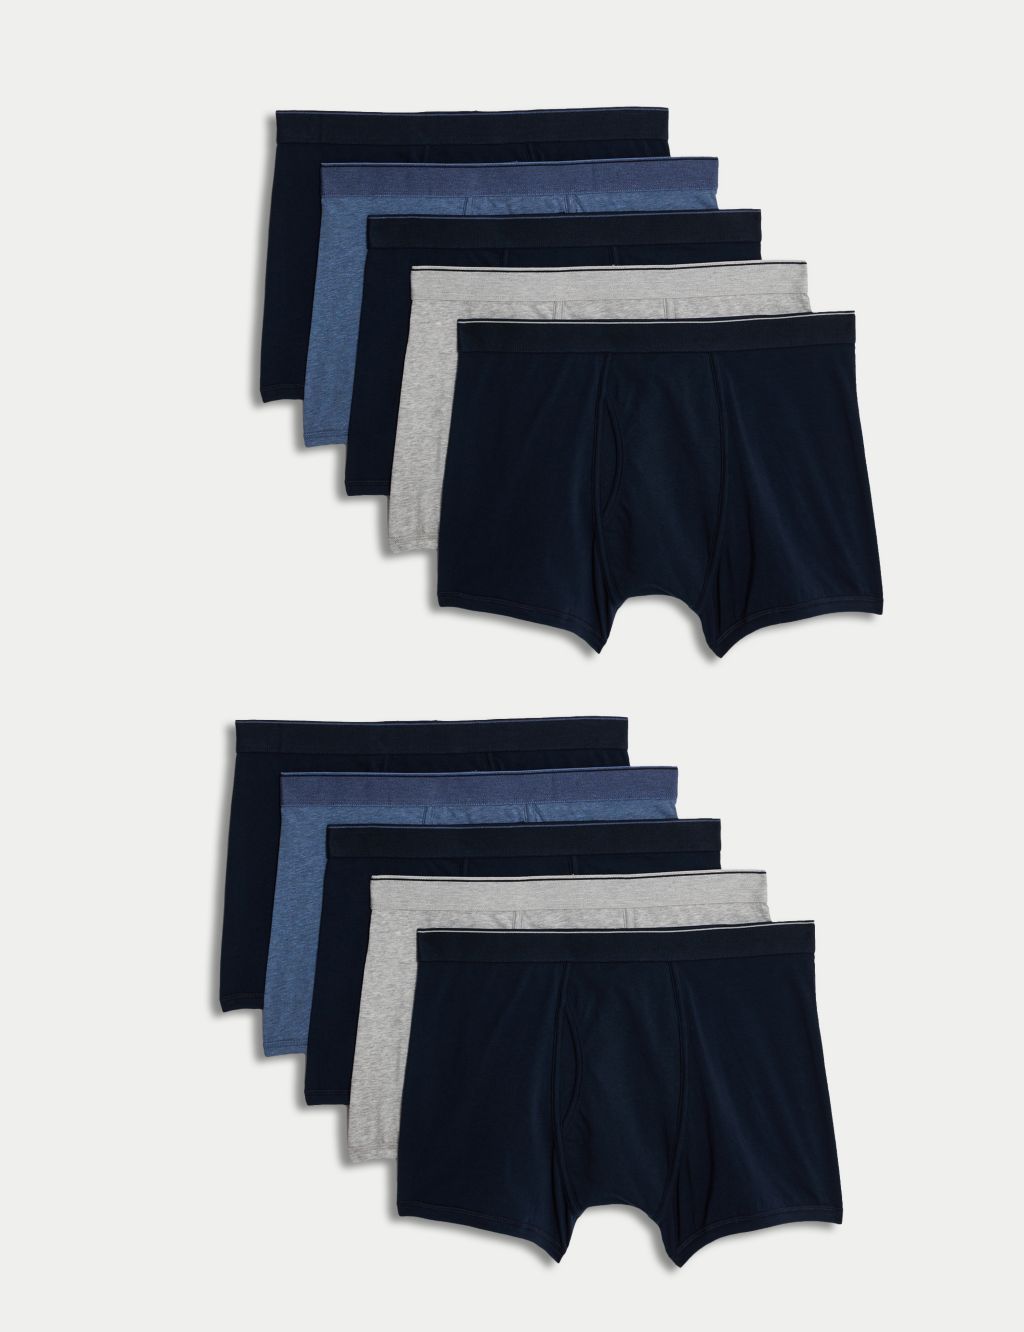 Buy Vanever 3PK Men's Woven Boxers, 100% Cotton Boxer Shorts for Men,  Boxershorts with Button Fly, Underwear, Blue Assorted, Medium Big Tall at